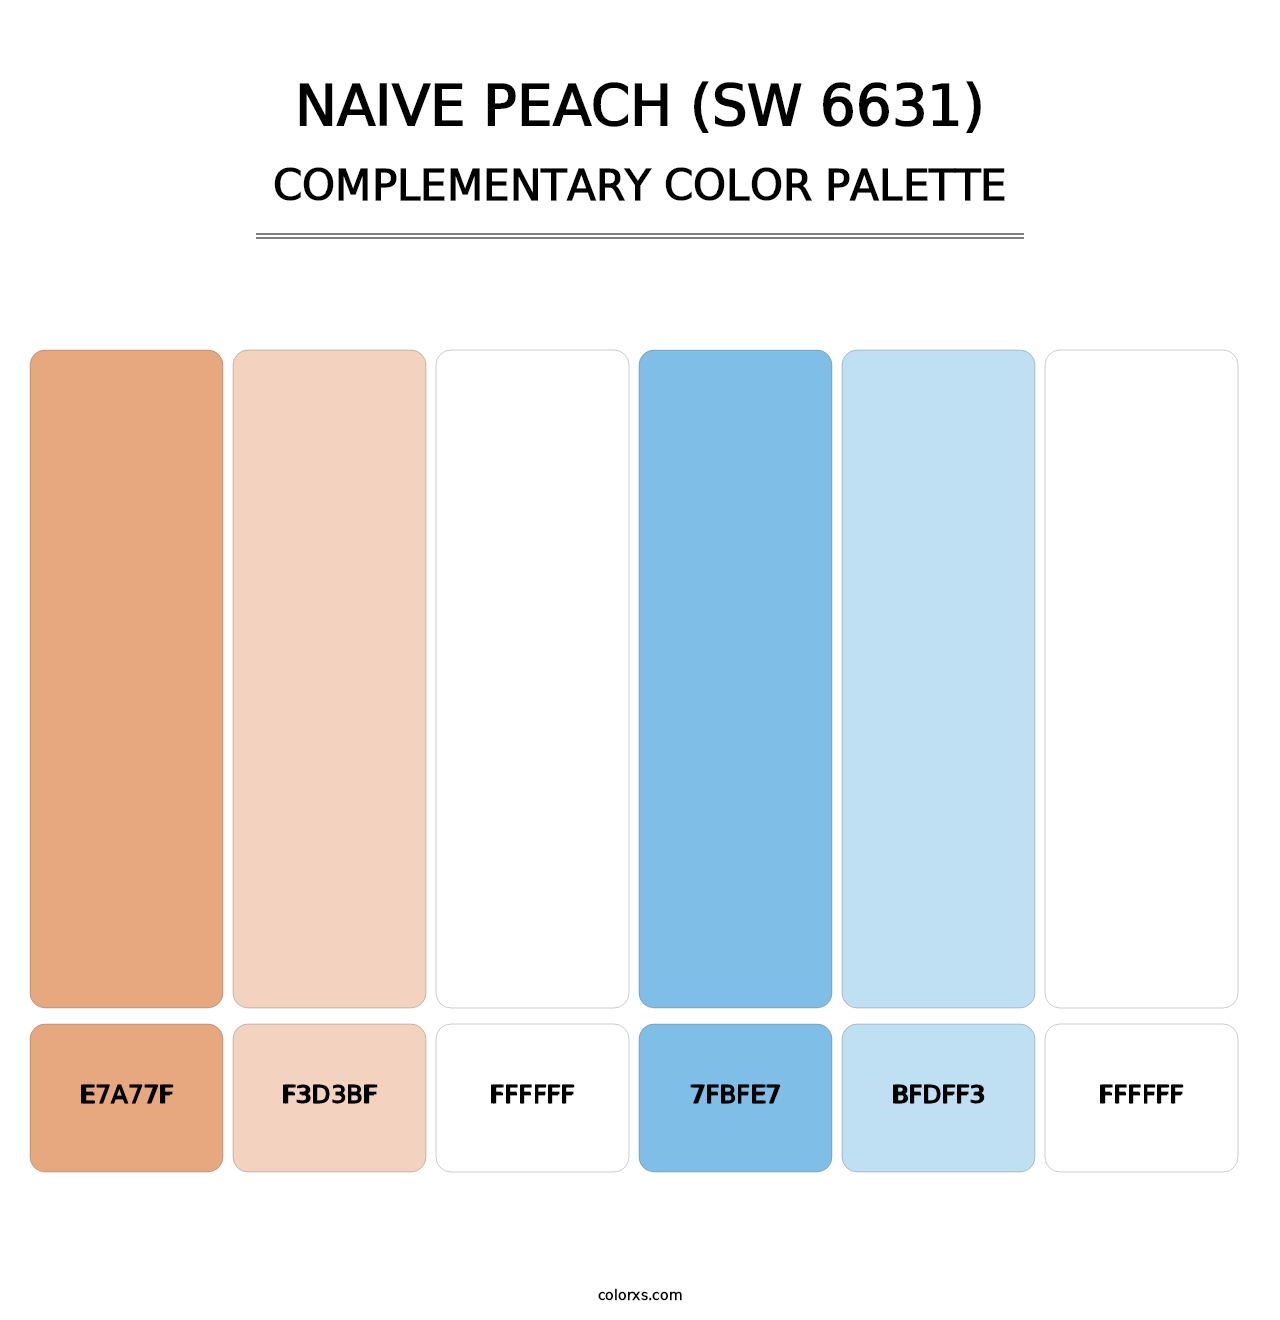 Naive Peach (SW 6631) - Complementary Color Palette